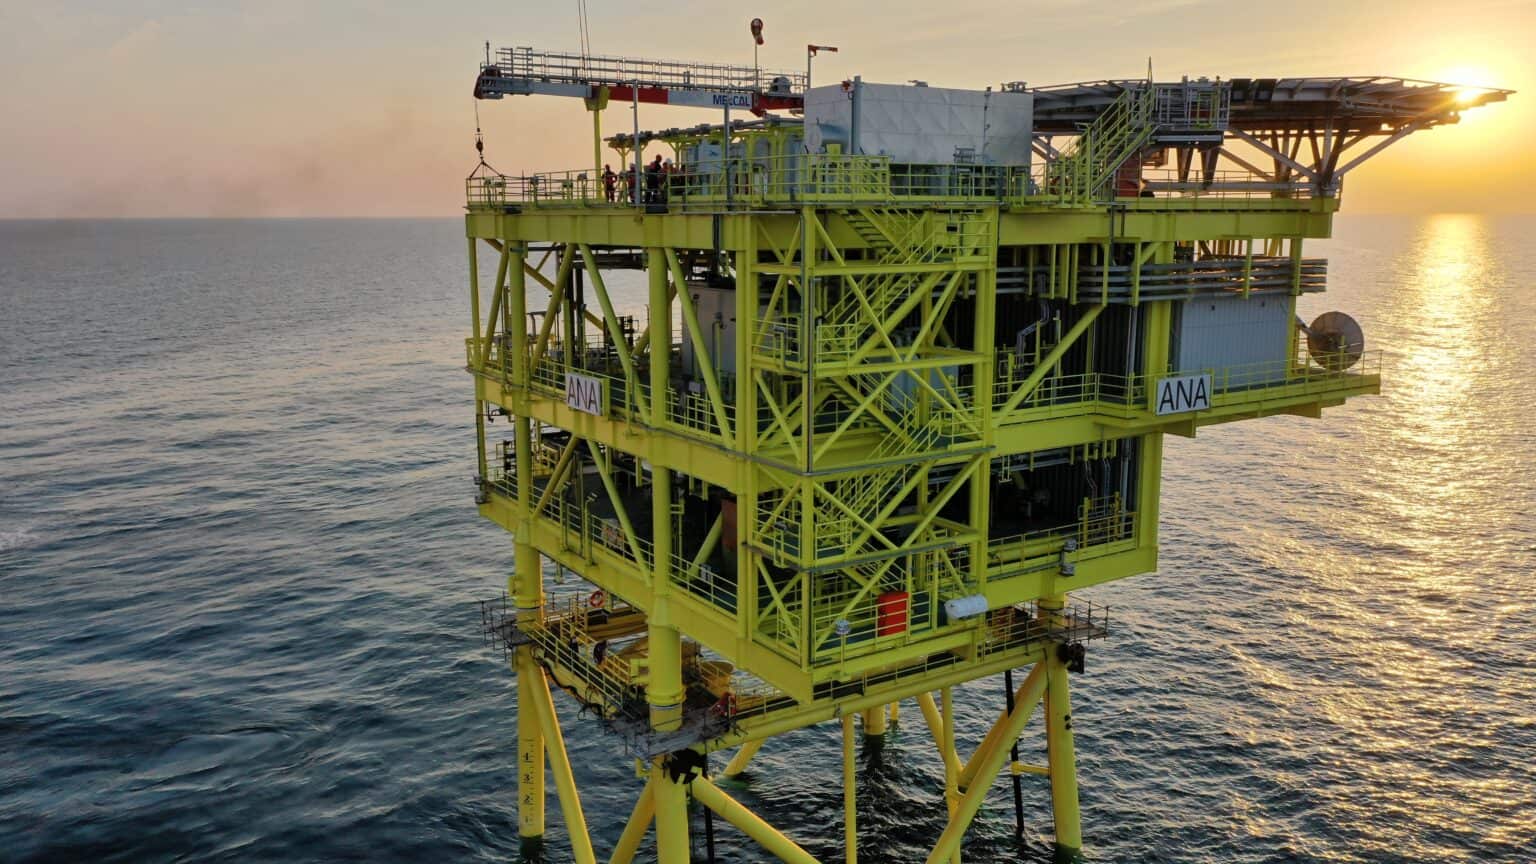 Photo: Black Sea Oil & Gas delivers first gas from the MGD Project. Credit: Black Sea Oil and Gas. https://www.blackseaog.com/black-sea-oil-gas-delivers-first-gas-from-the-mgd-project/